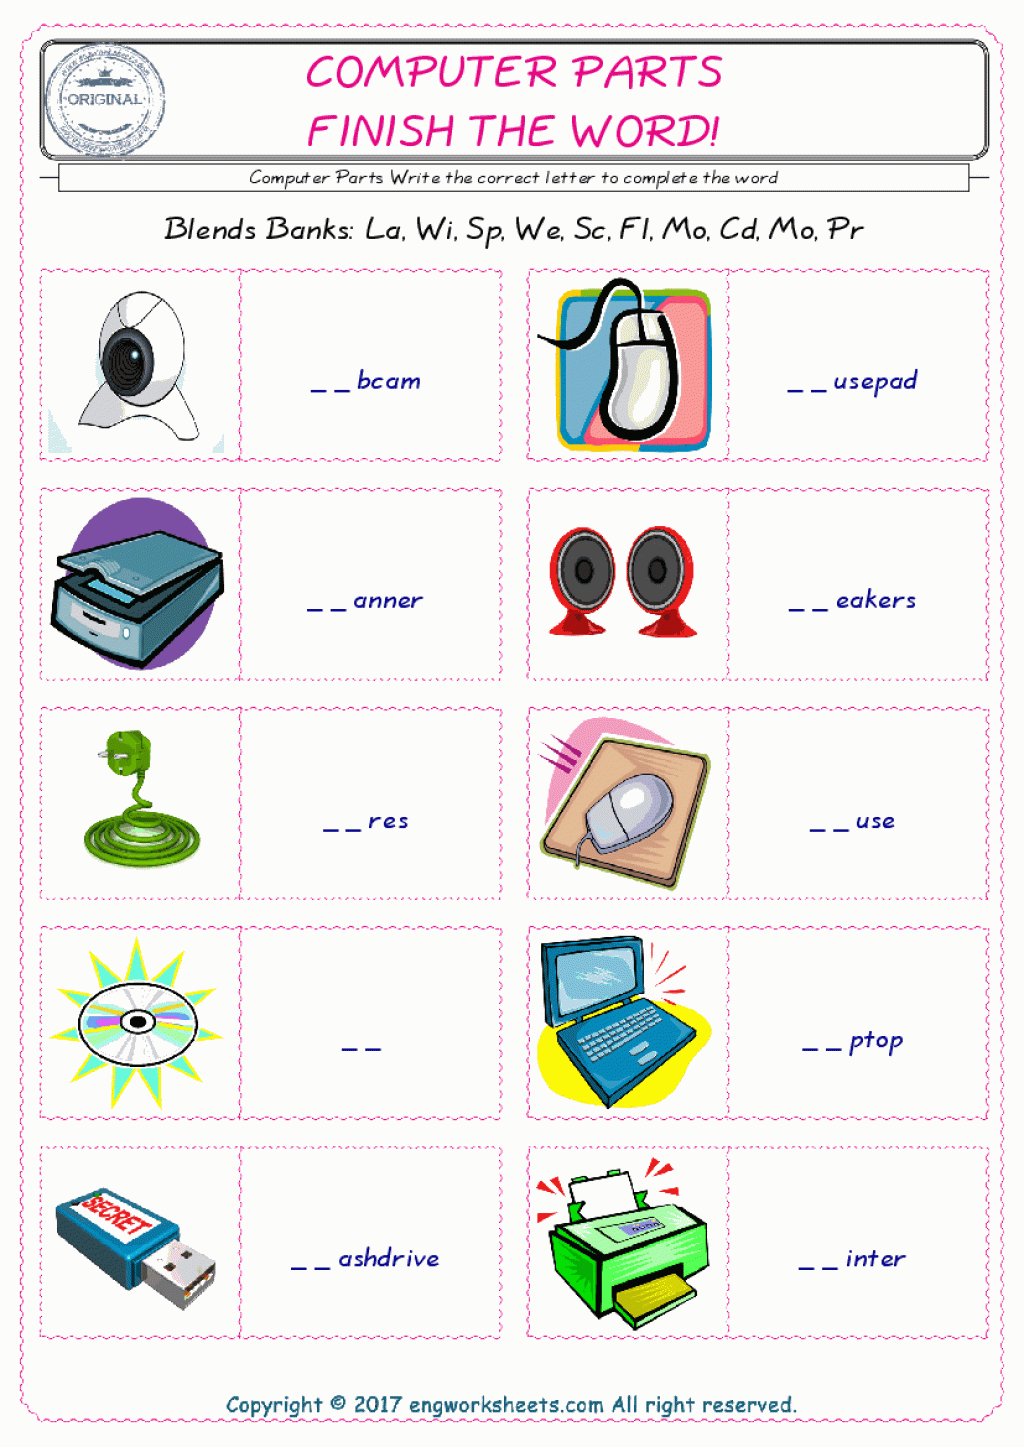 Picture of: Computer Parts English Worksheet for Kids ESL Printable Picture